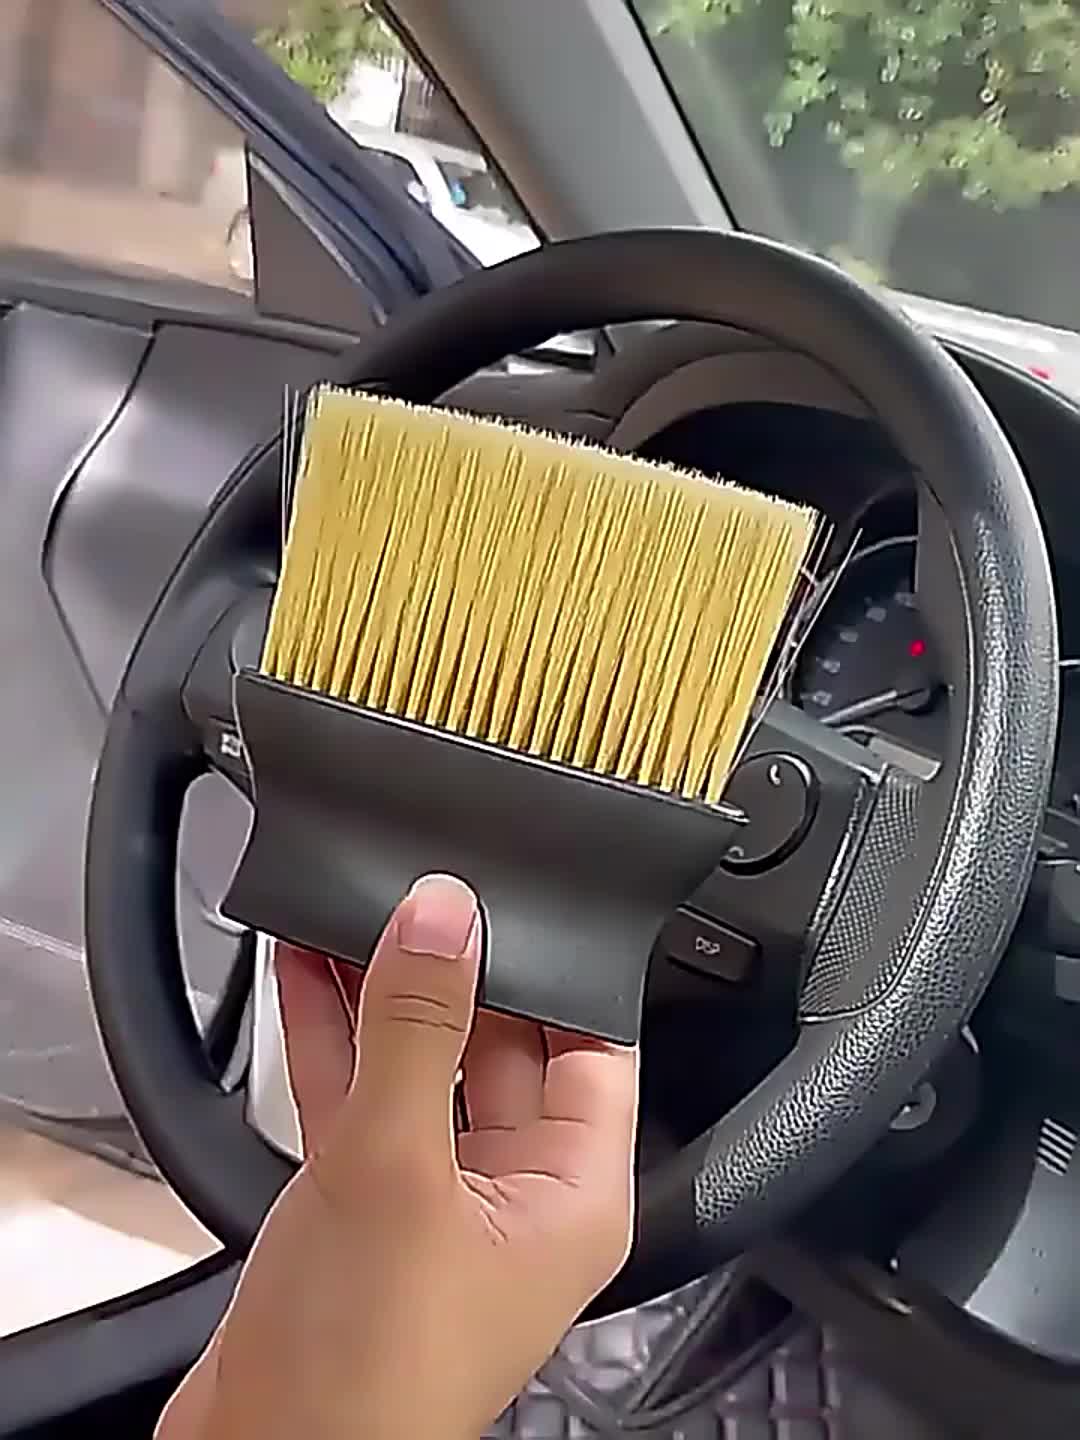 Dockapa Car Vent Cleaner Brush - Auto Car AC Vent Detailing Brush with Wooden Handle | Automotive Detailing Brushes for Interior Air Vents Dashboard, Home